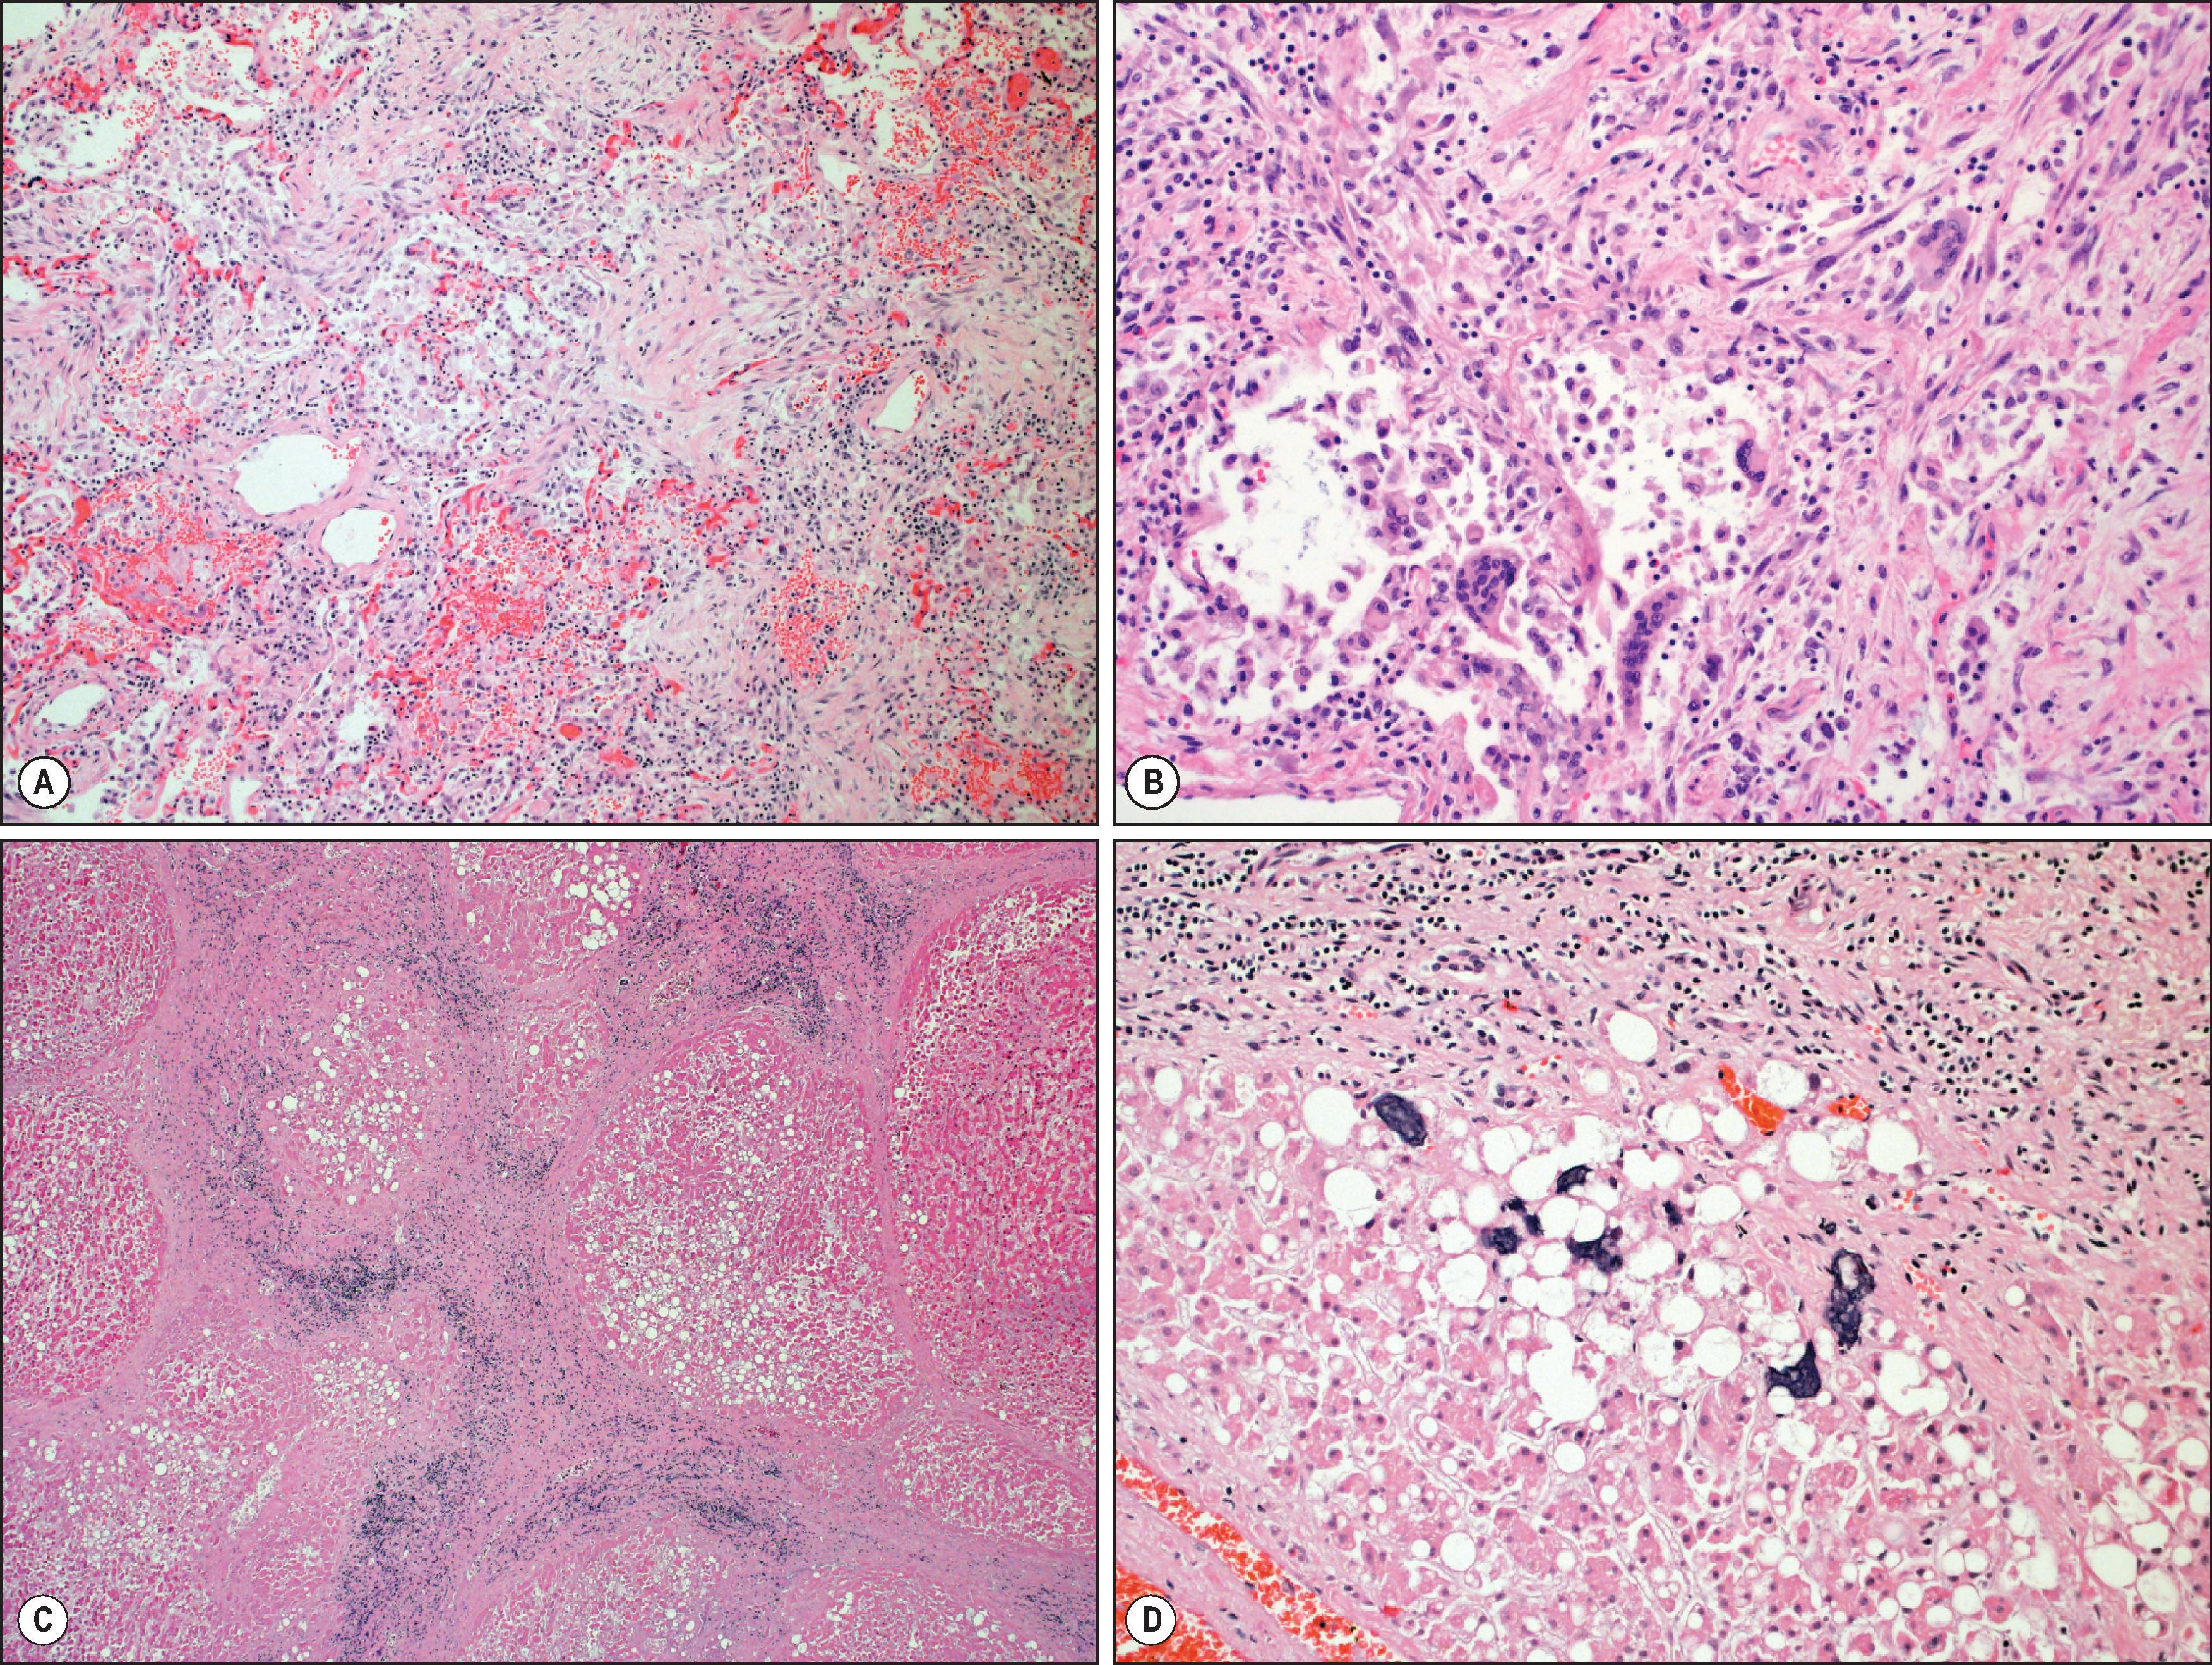 Figure 7.9, SARS-CoV-2 (COVID-19). (A) Organizing pneumonia with fibroblast proliferation, type 2 pneumocyte hyperplasia, chronic inflammation and haemorrhage in a patient who died approximately 2 weeks after diagnosis. (B) Organizing pneumonia with multinucleated, syncytial-appearing pneumocytes. (C) Cirrhotic liver due to alcoholic steatohepatitis in a fatal case of SARS-CoV-2. (D) Focal basophilic structures are identified in the hepatic sinusoids.